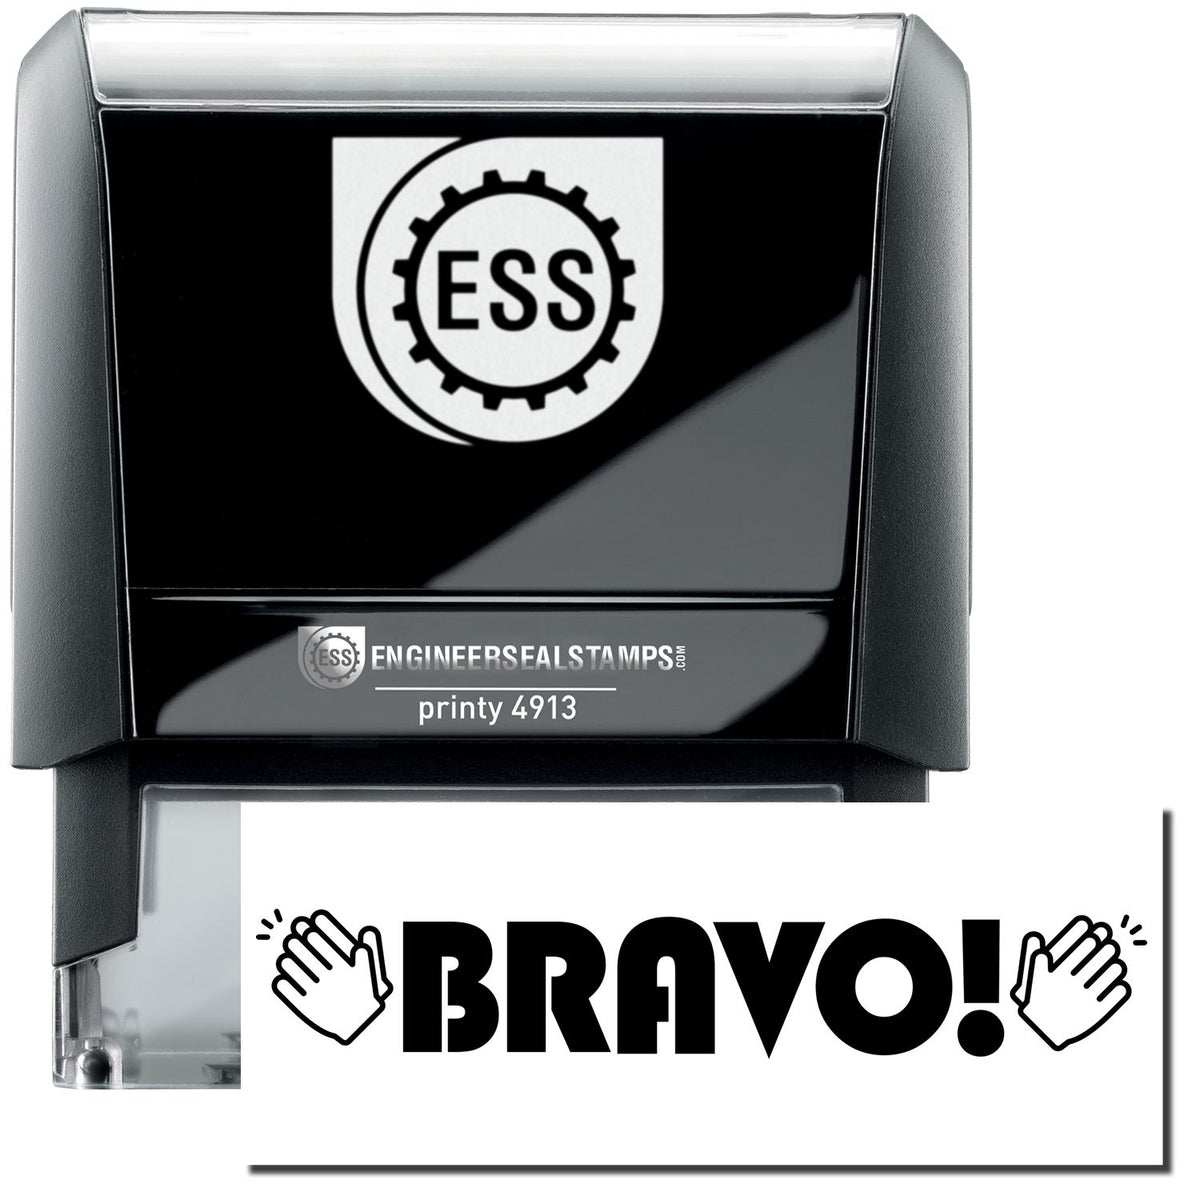 A self-inking stamp with a stamped image showing how the text &quot;BRAVO!&quot; in a large unique bold font with clapping Hands on both left and the right side of the text is displayed after stamping.